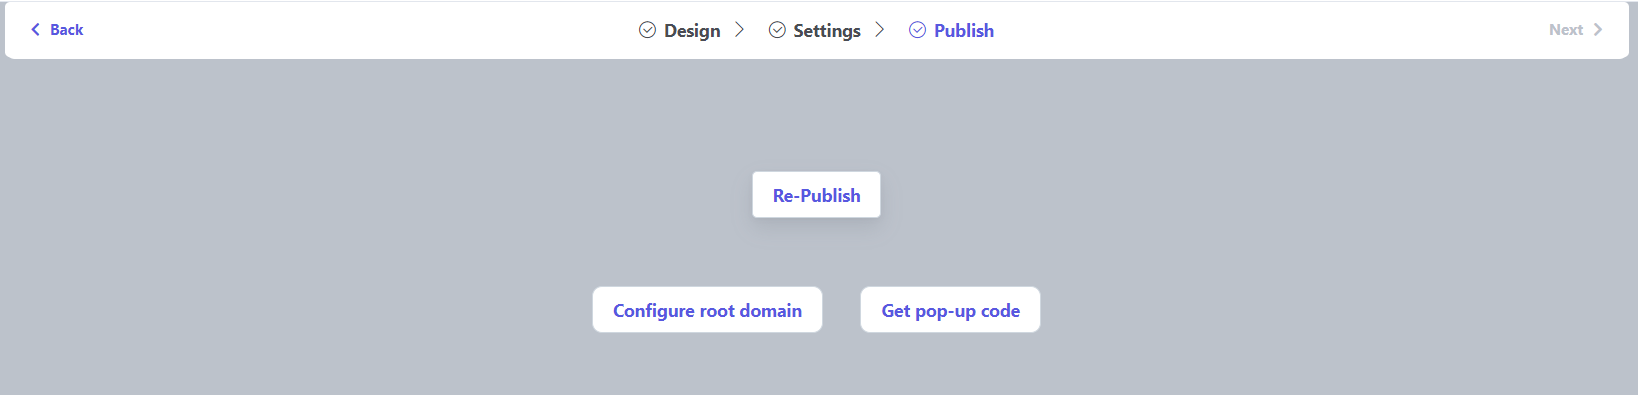 Add a pop-up form to your Shopify store